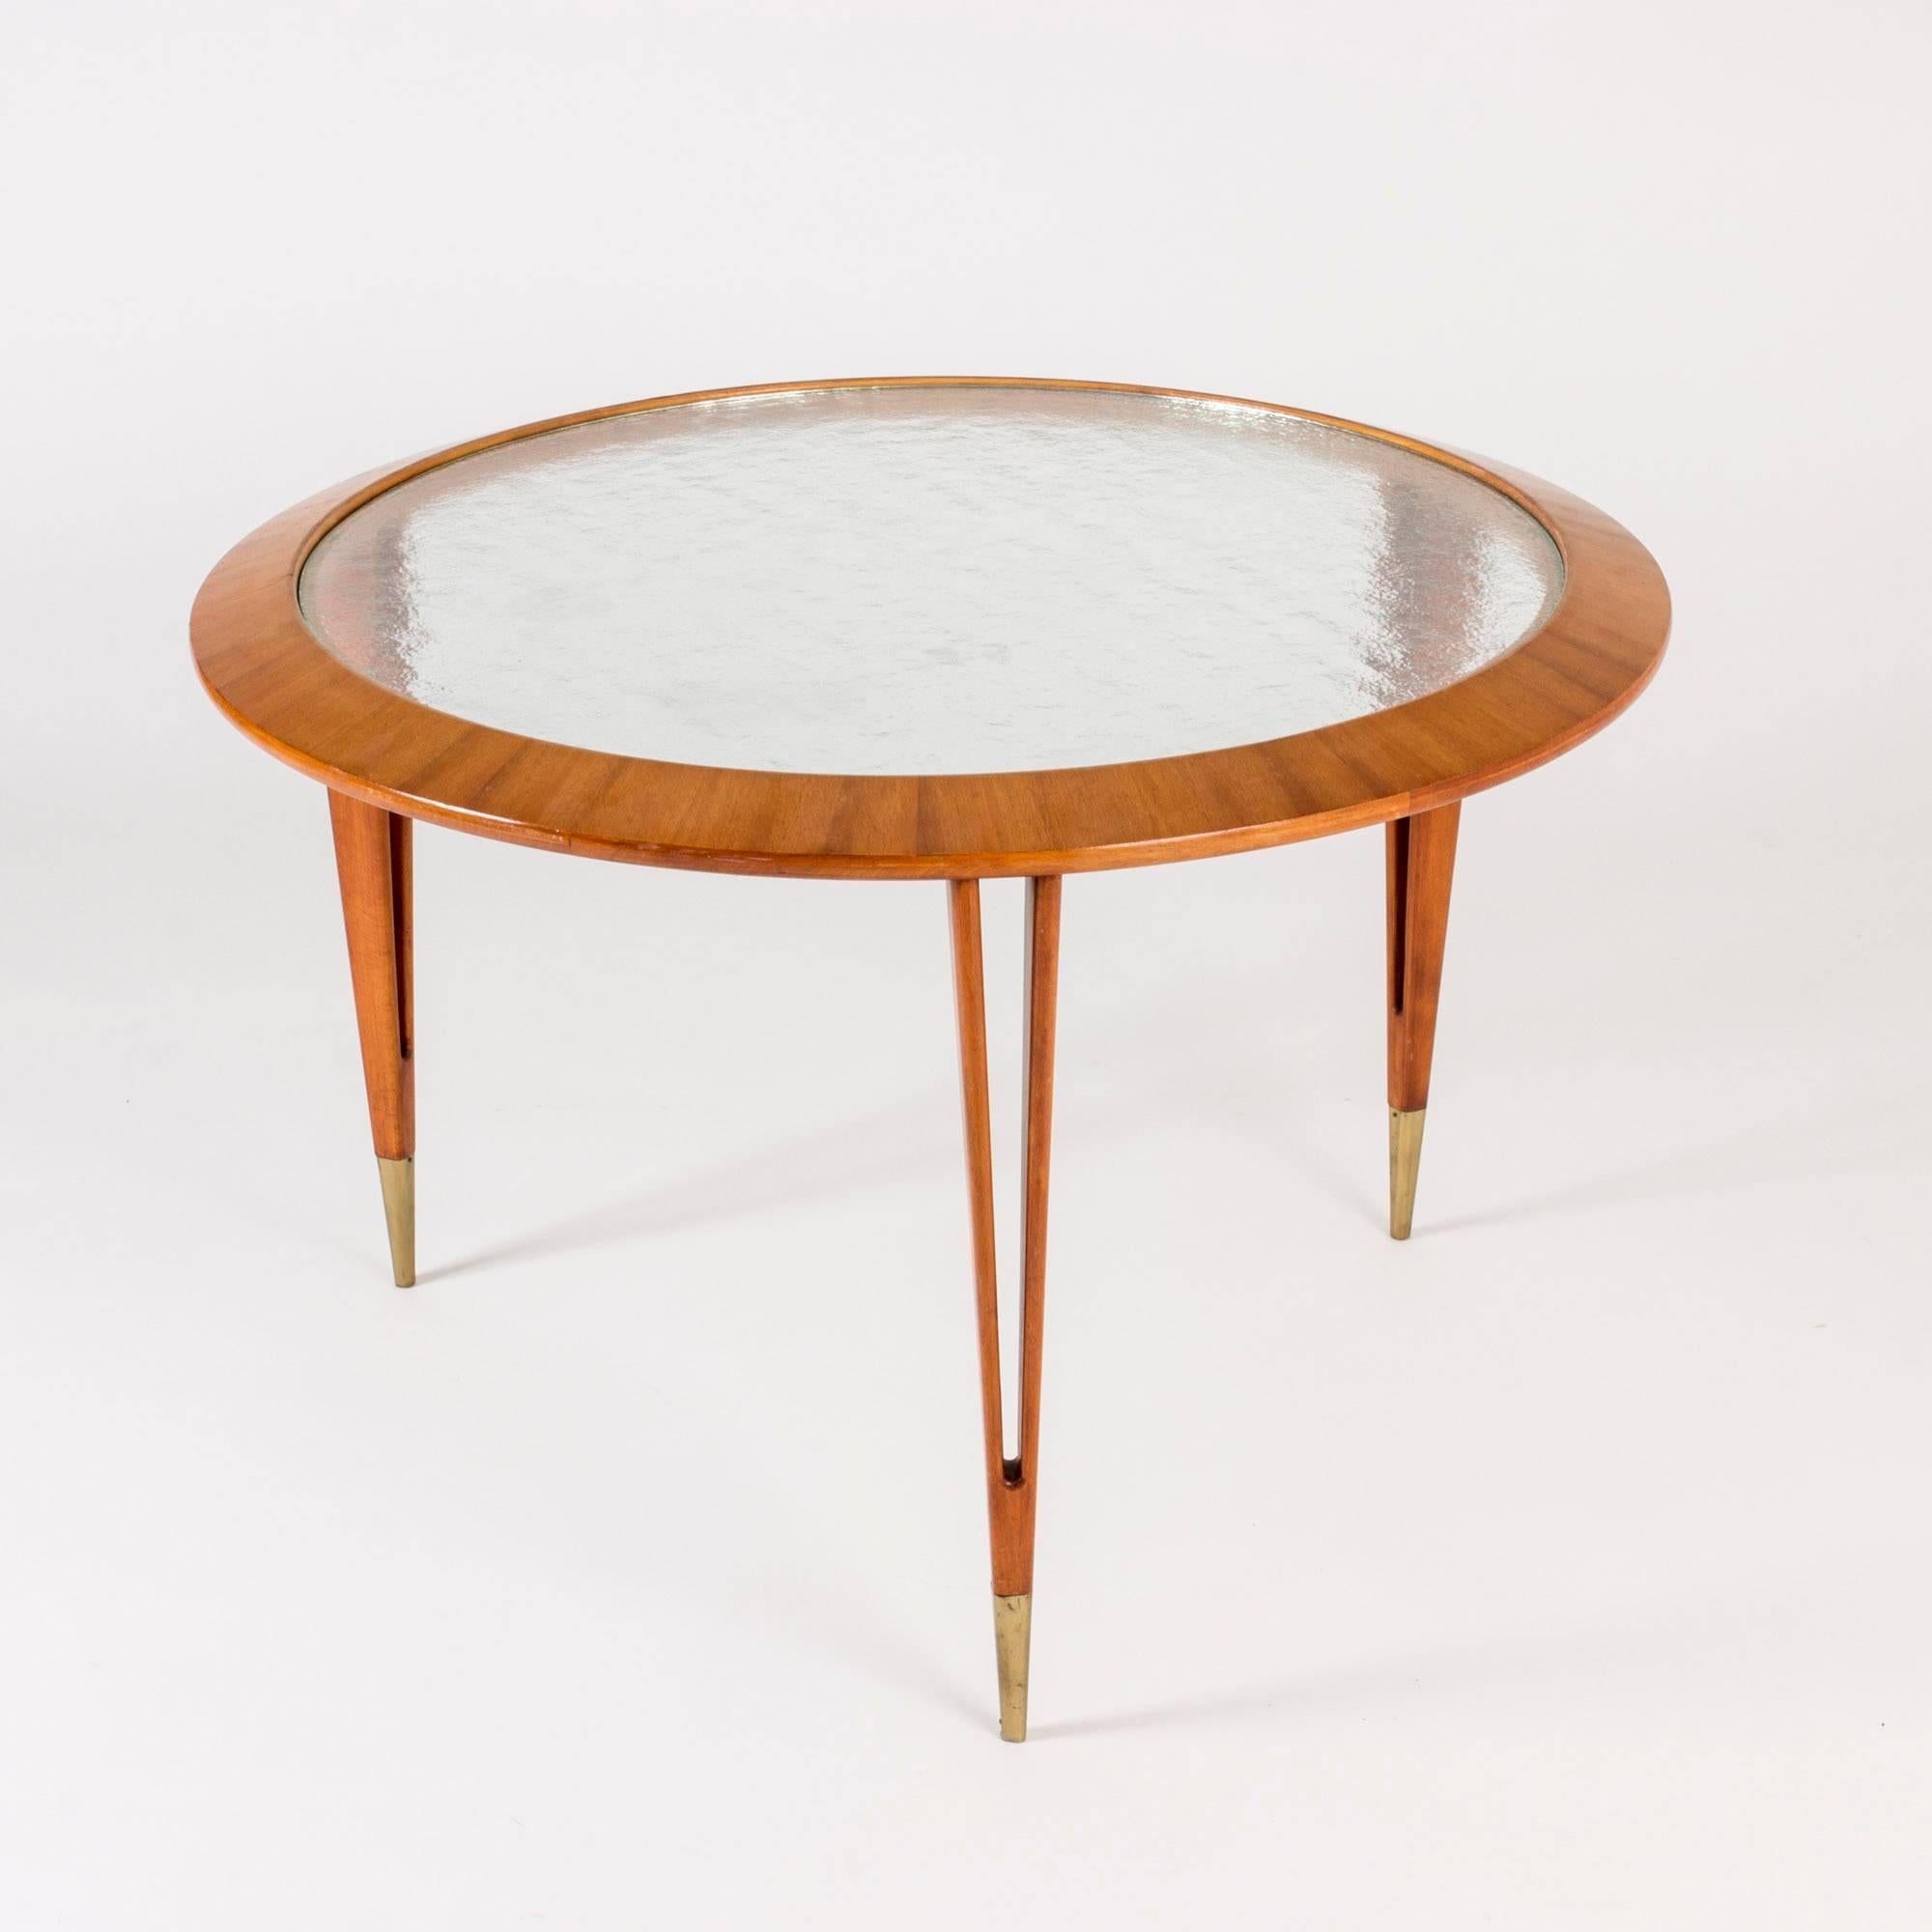 Beautiful coffee table by Bertil Fridhagen, with a glass table top in a mahogany frame. The mahogany veneer is layed in a pattern of rays from the center. Legs sculpted in a split design with brass feet.